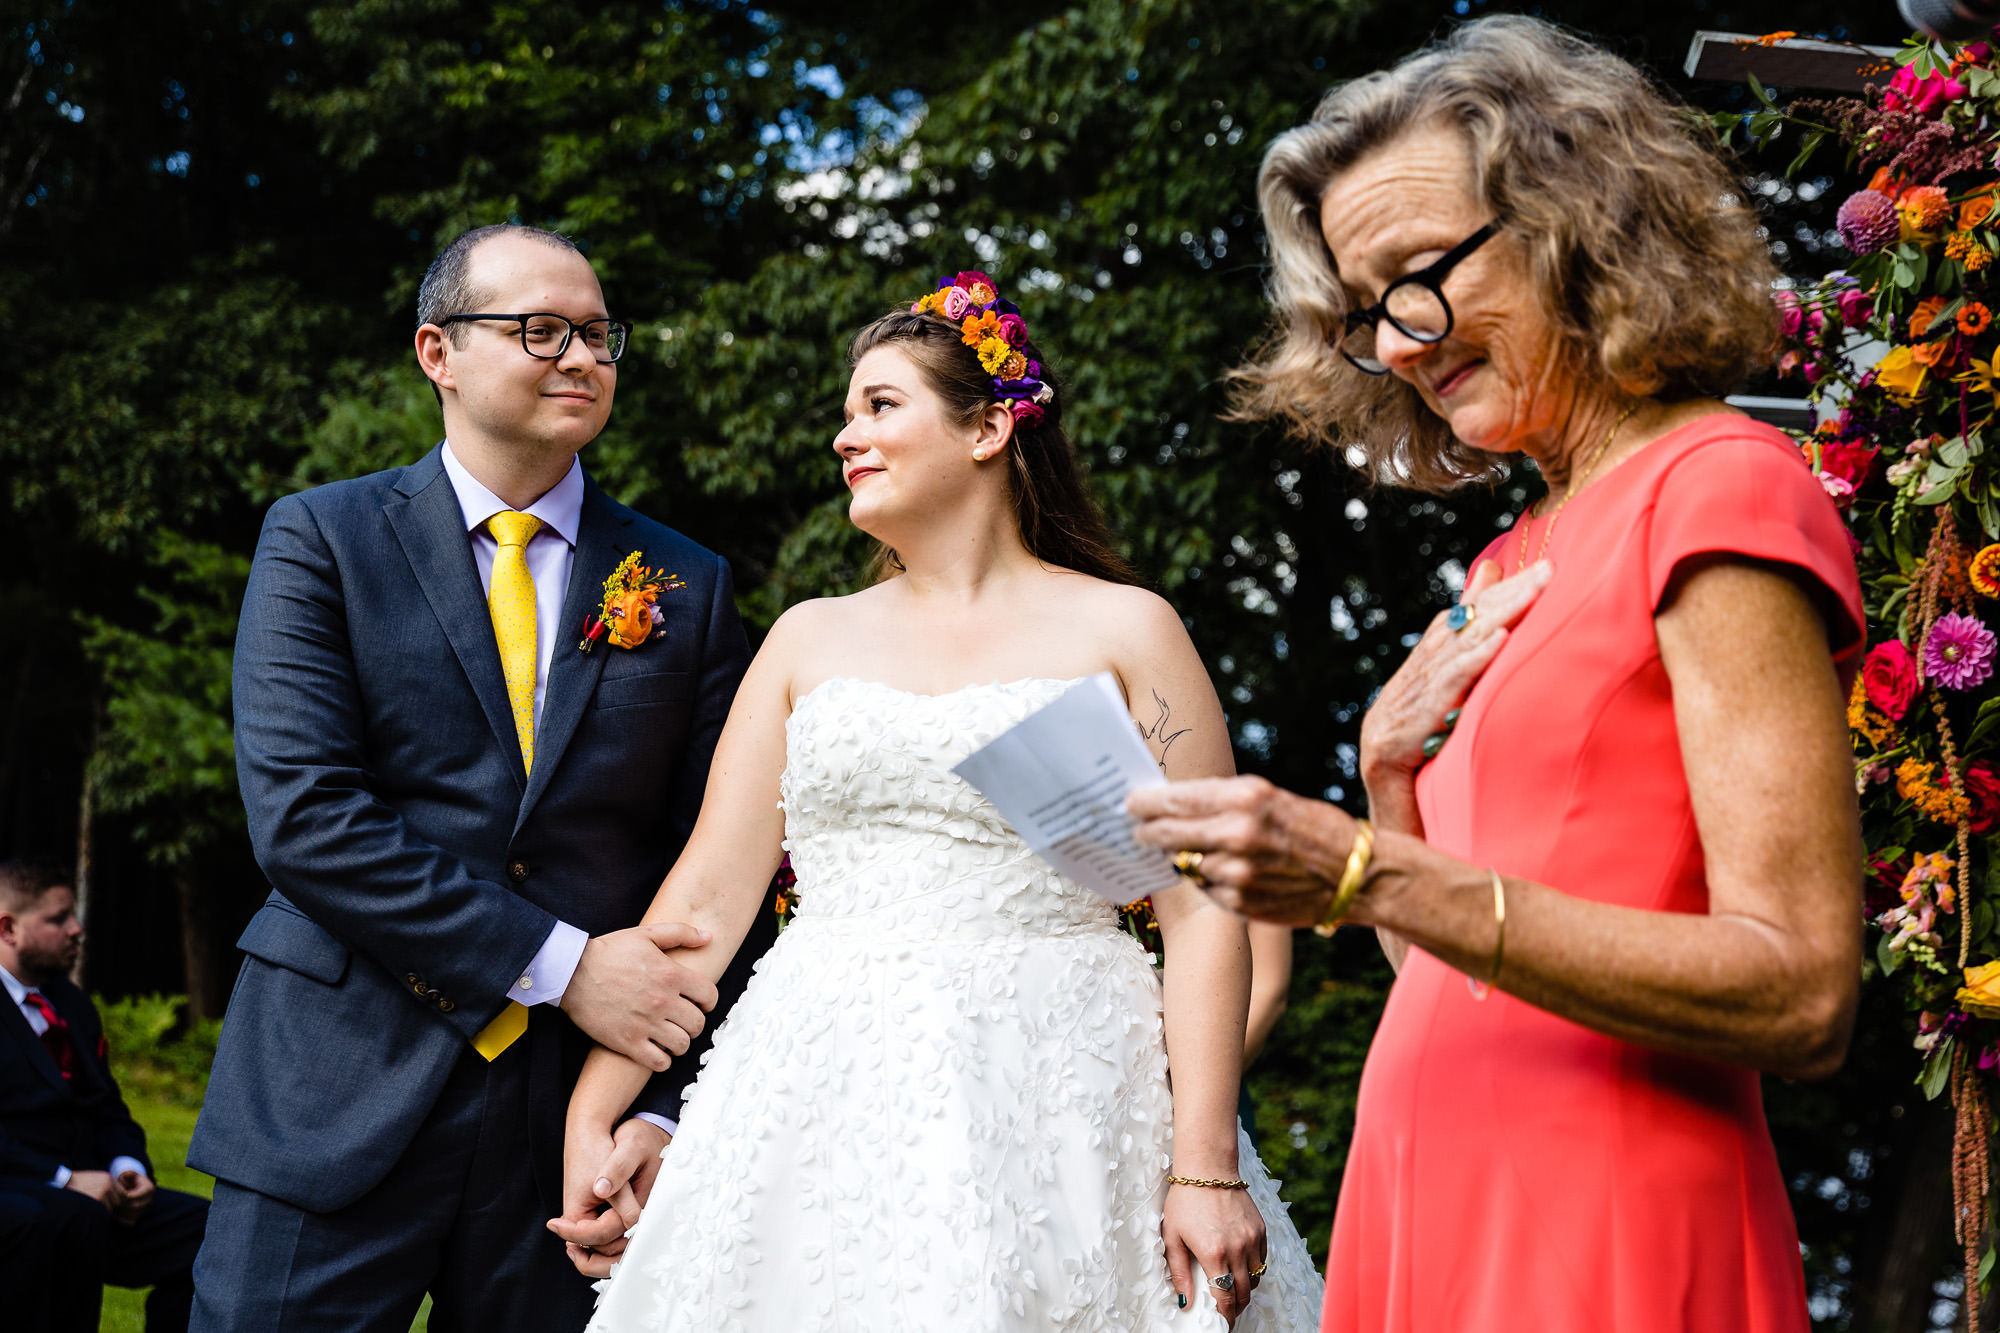 A couple looks at each other emotionally during a reading at a wedding ceremony